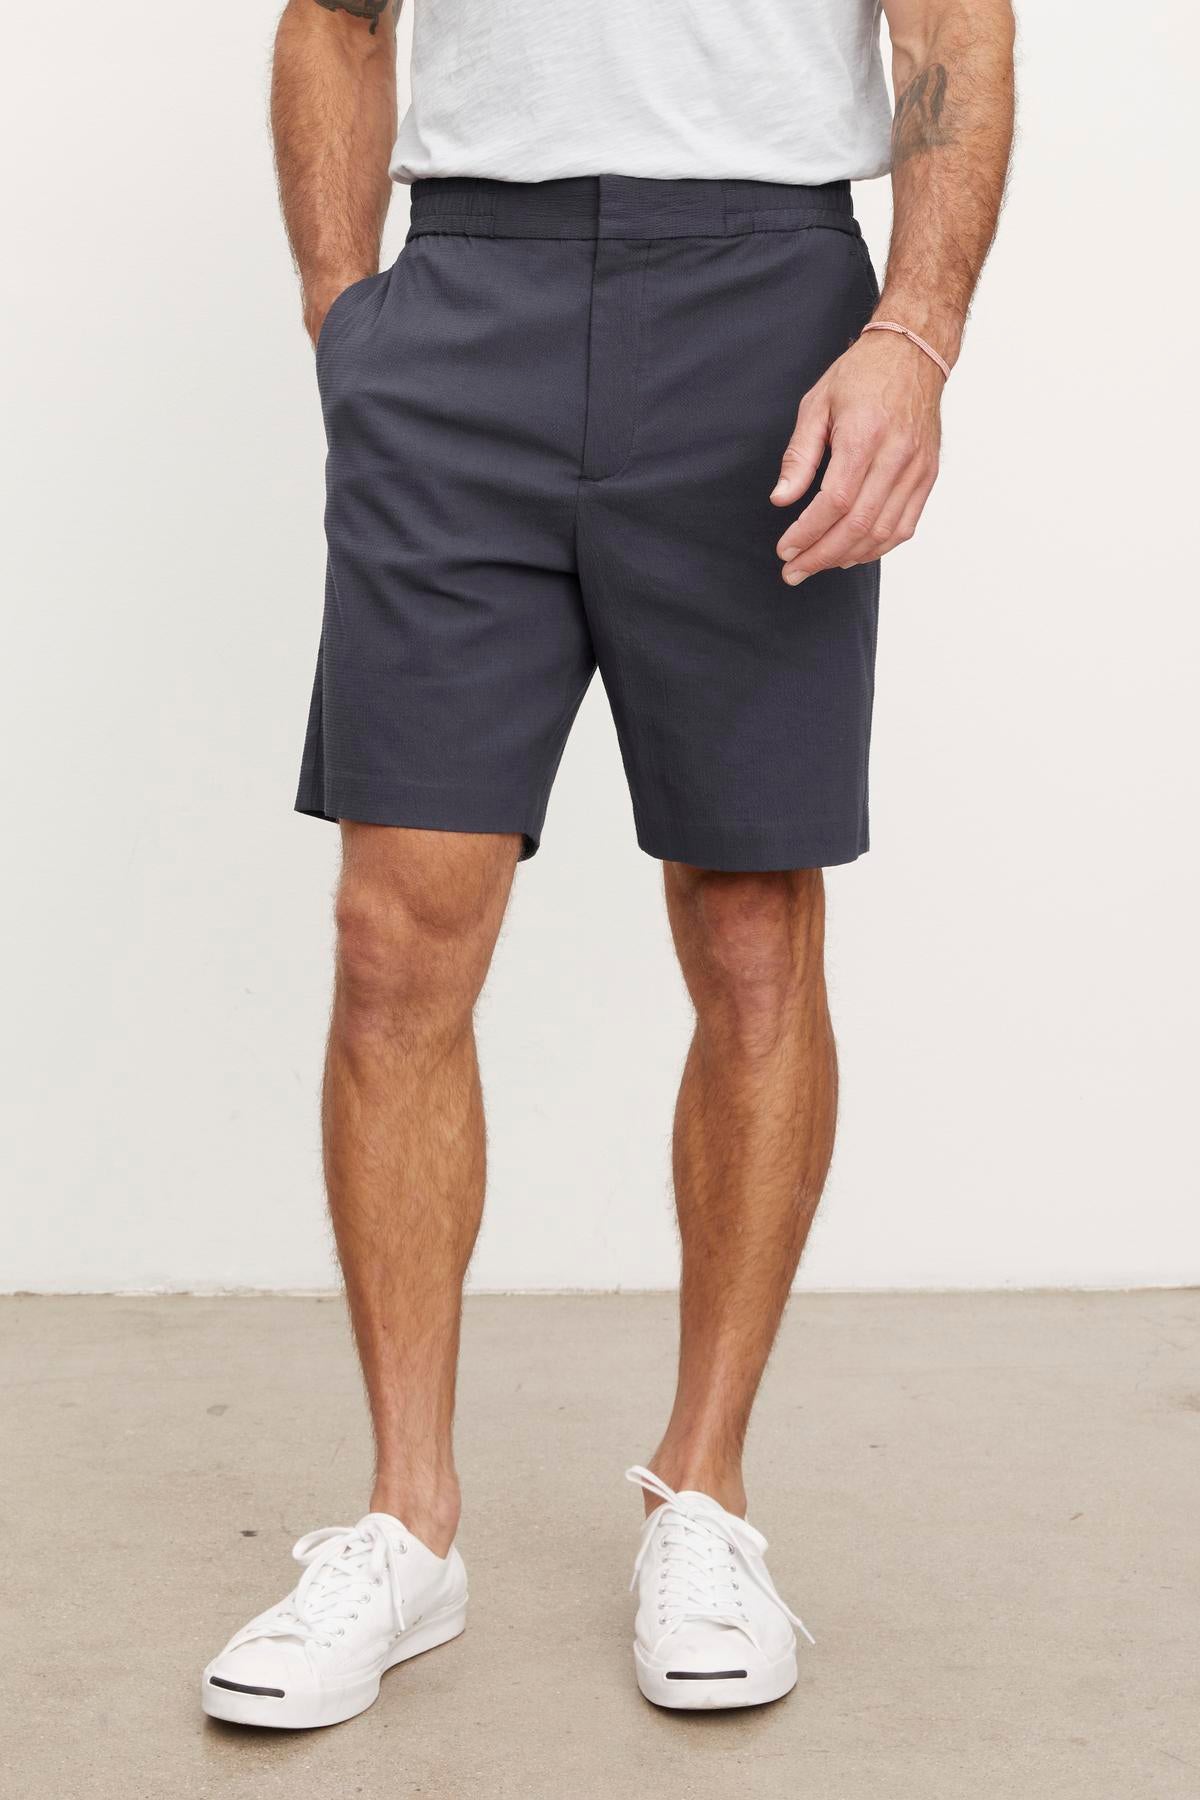   A frontal view of a man from the waist down, wearing Velvet by Graham & Spencer's DAMIAN SHORTS with slash pockets and white sneakers. He has his left hand partially in his pocket. 